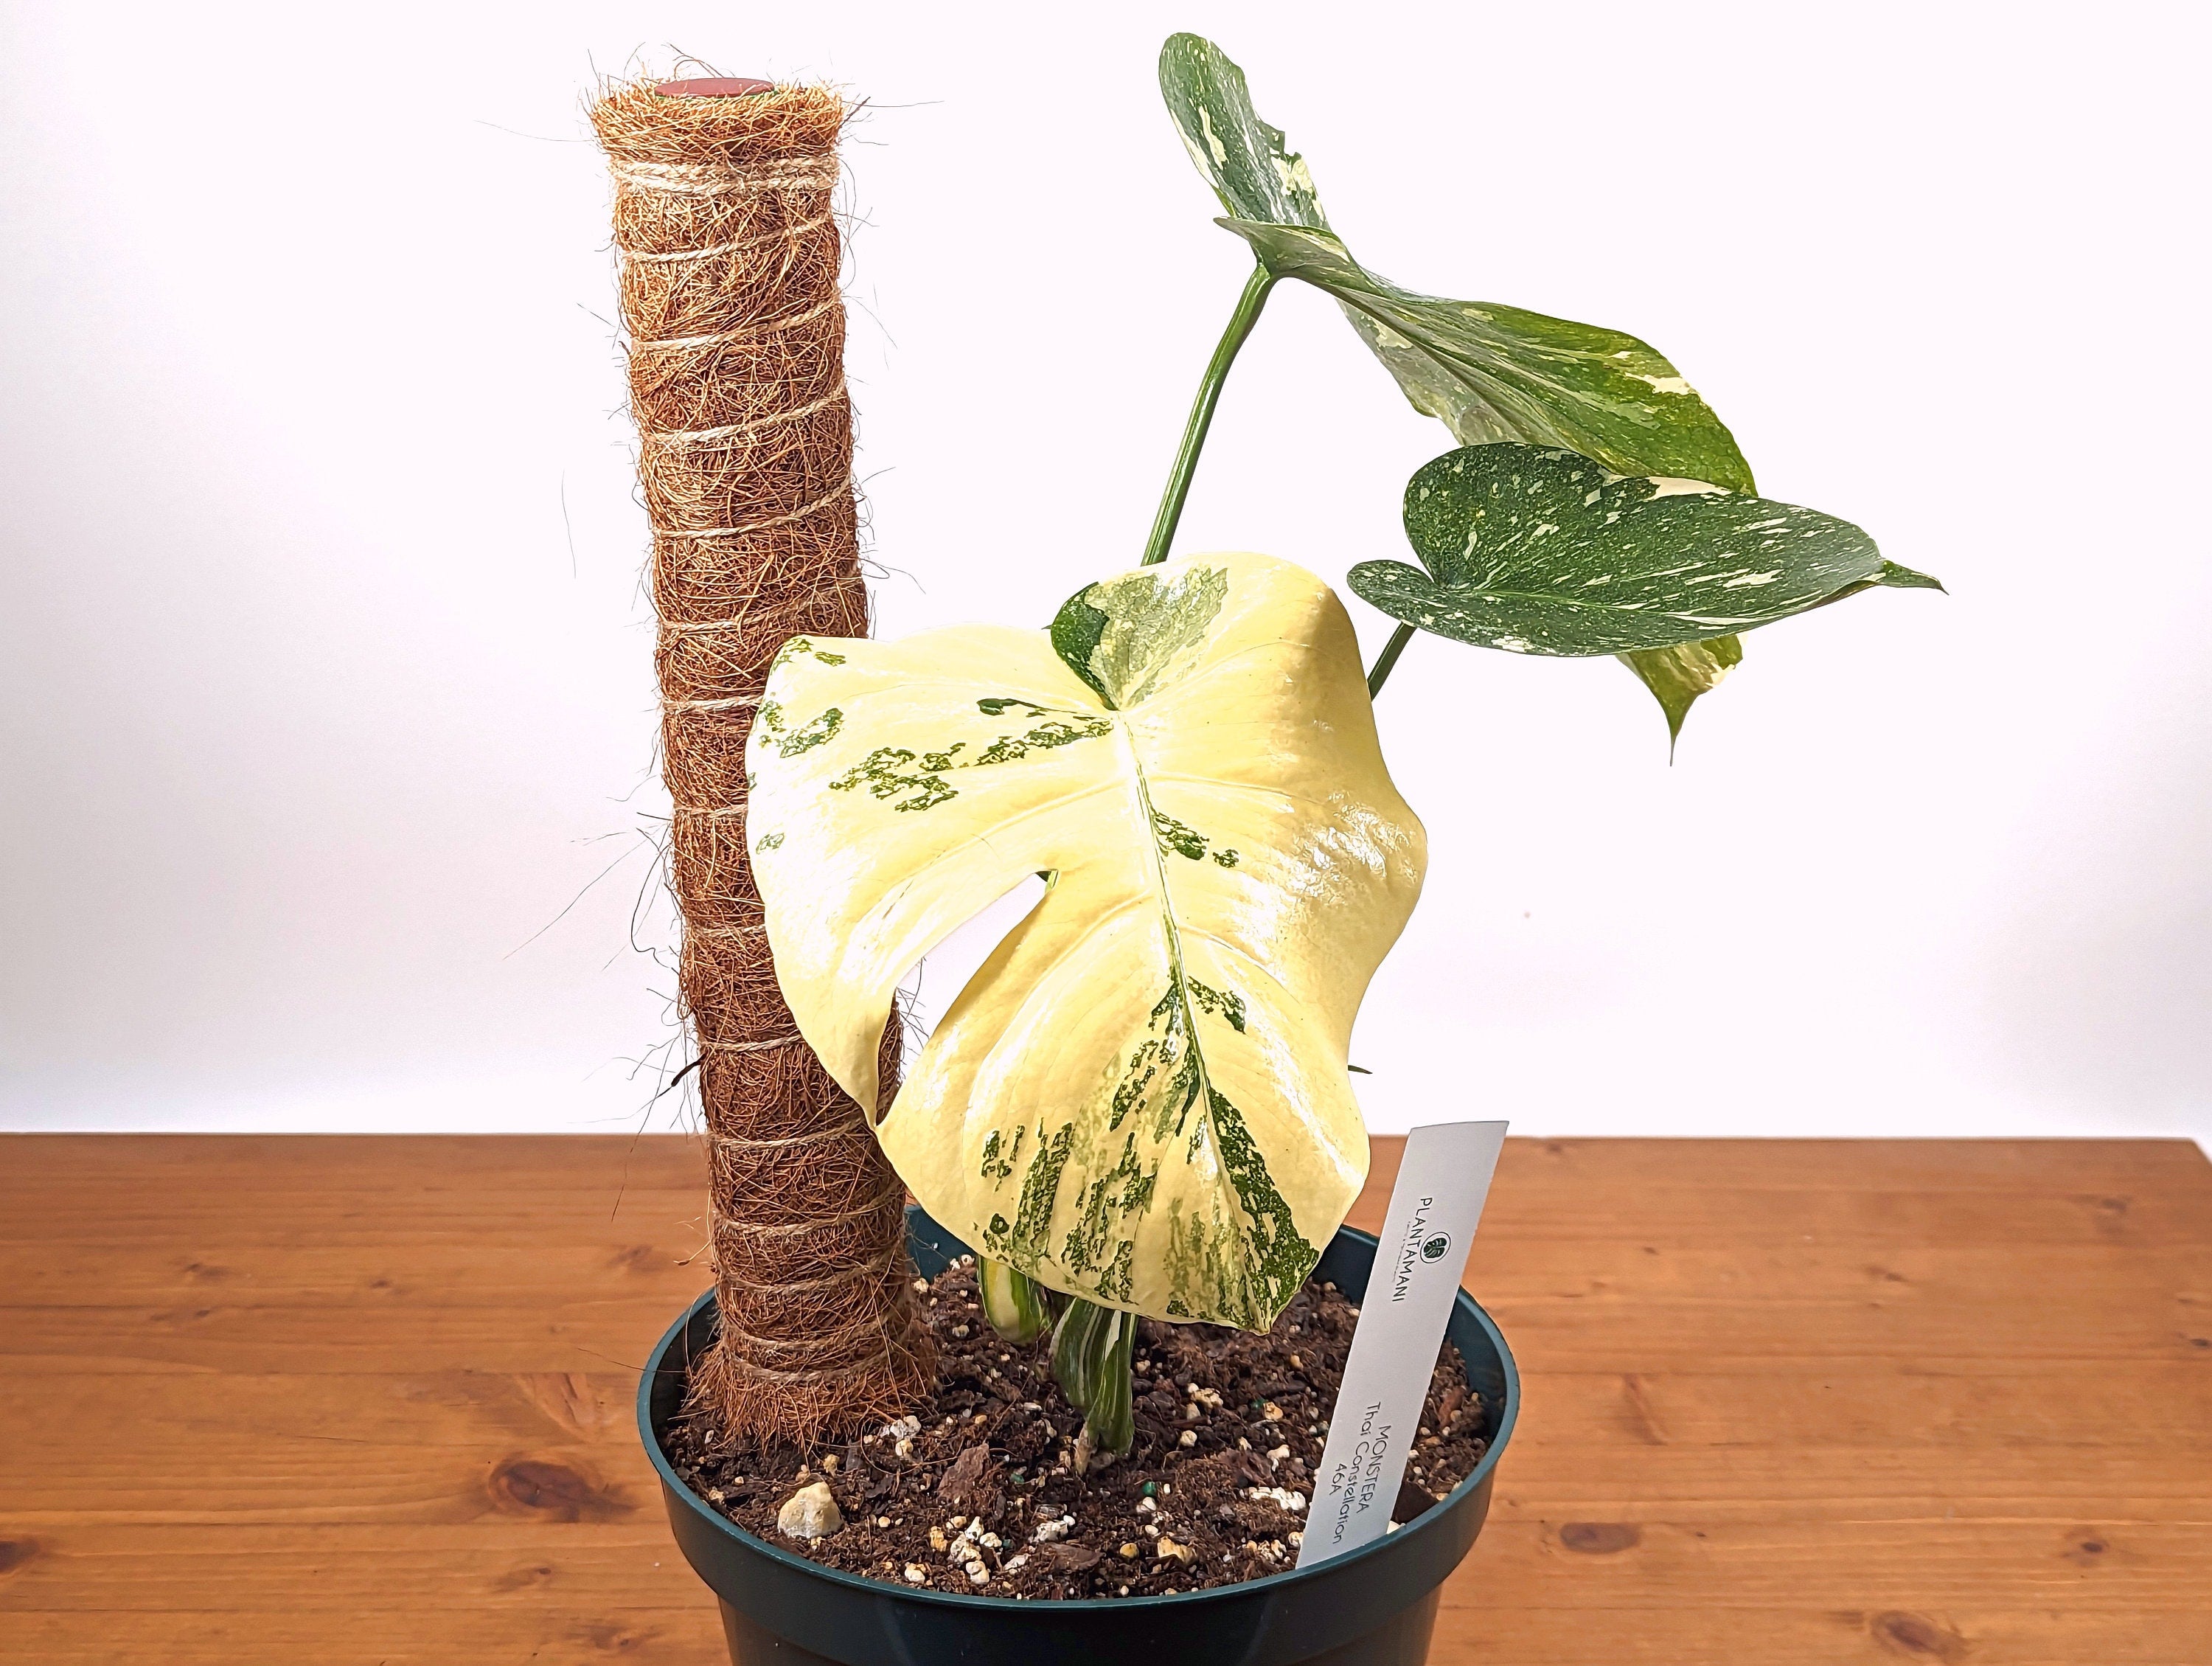 HIGh Color Thai Constellation Monstera Creme Brulee Live Houseplant 6 inch pot Exact Plant Pictured 